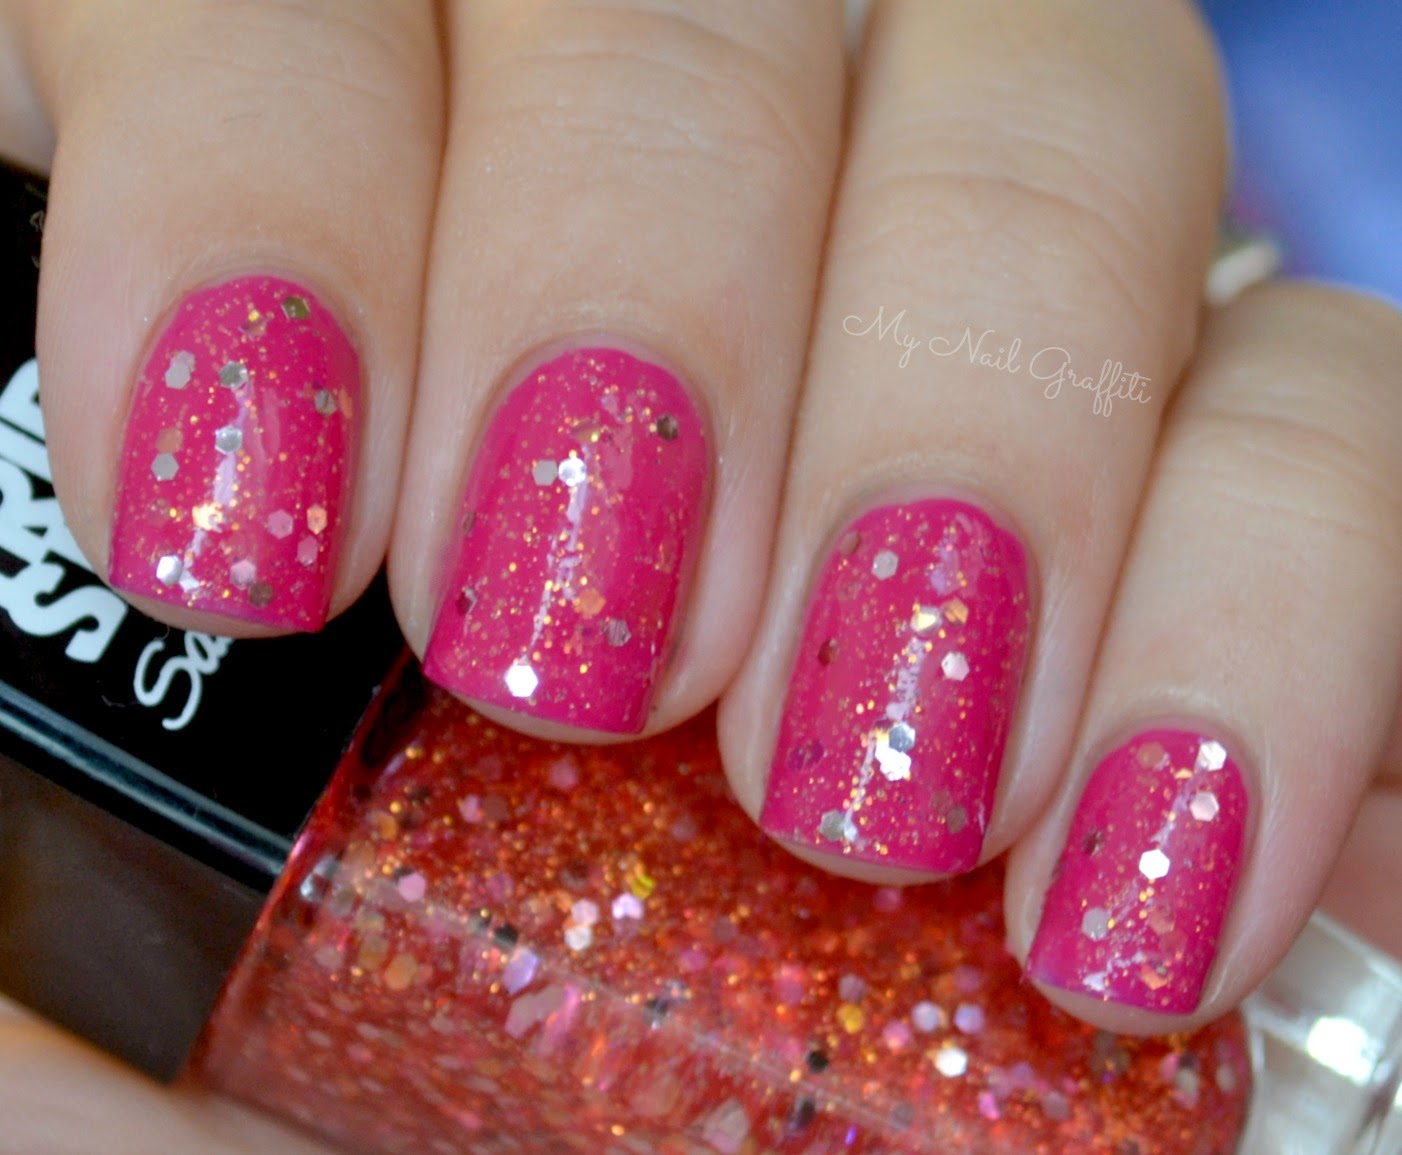 My Nail Graffiti: Sally Hansen Triple Shine Swatches and Review